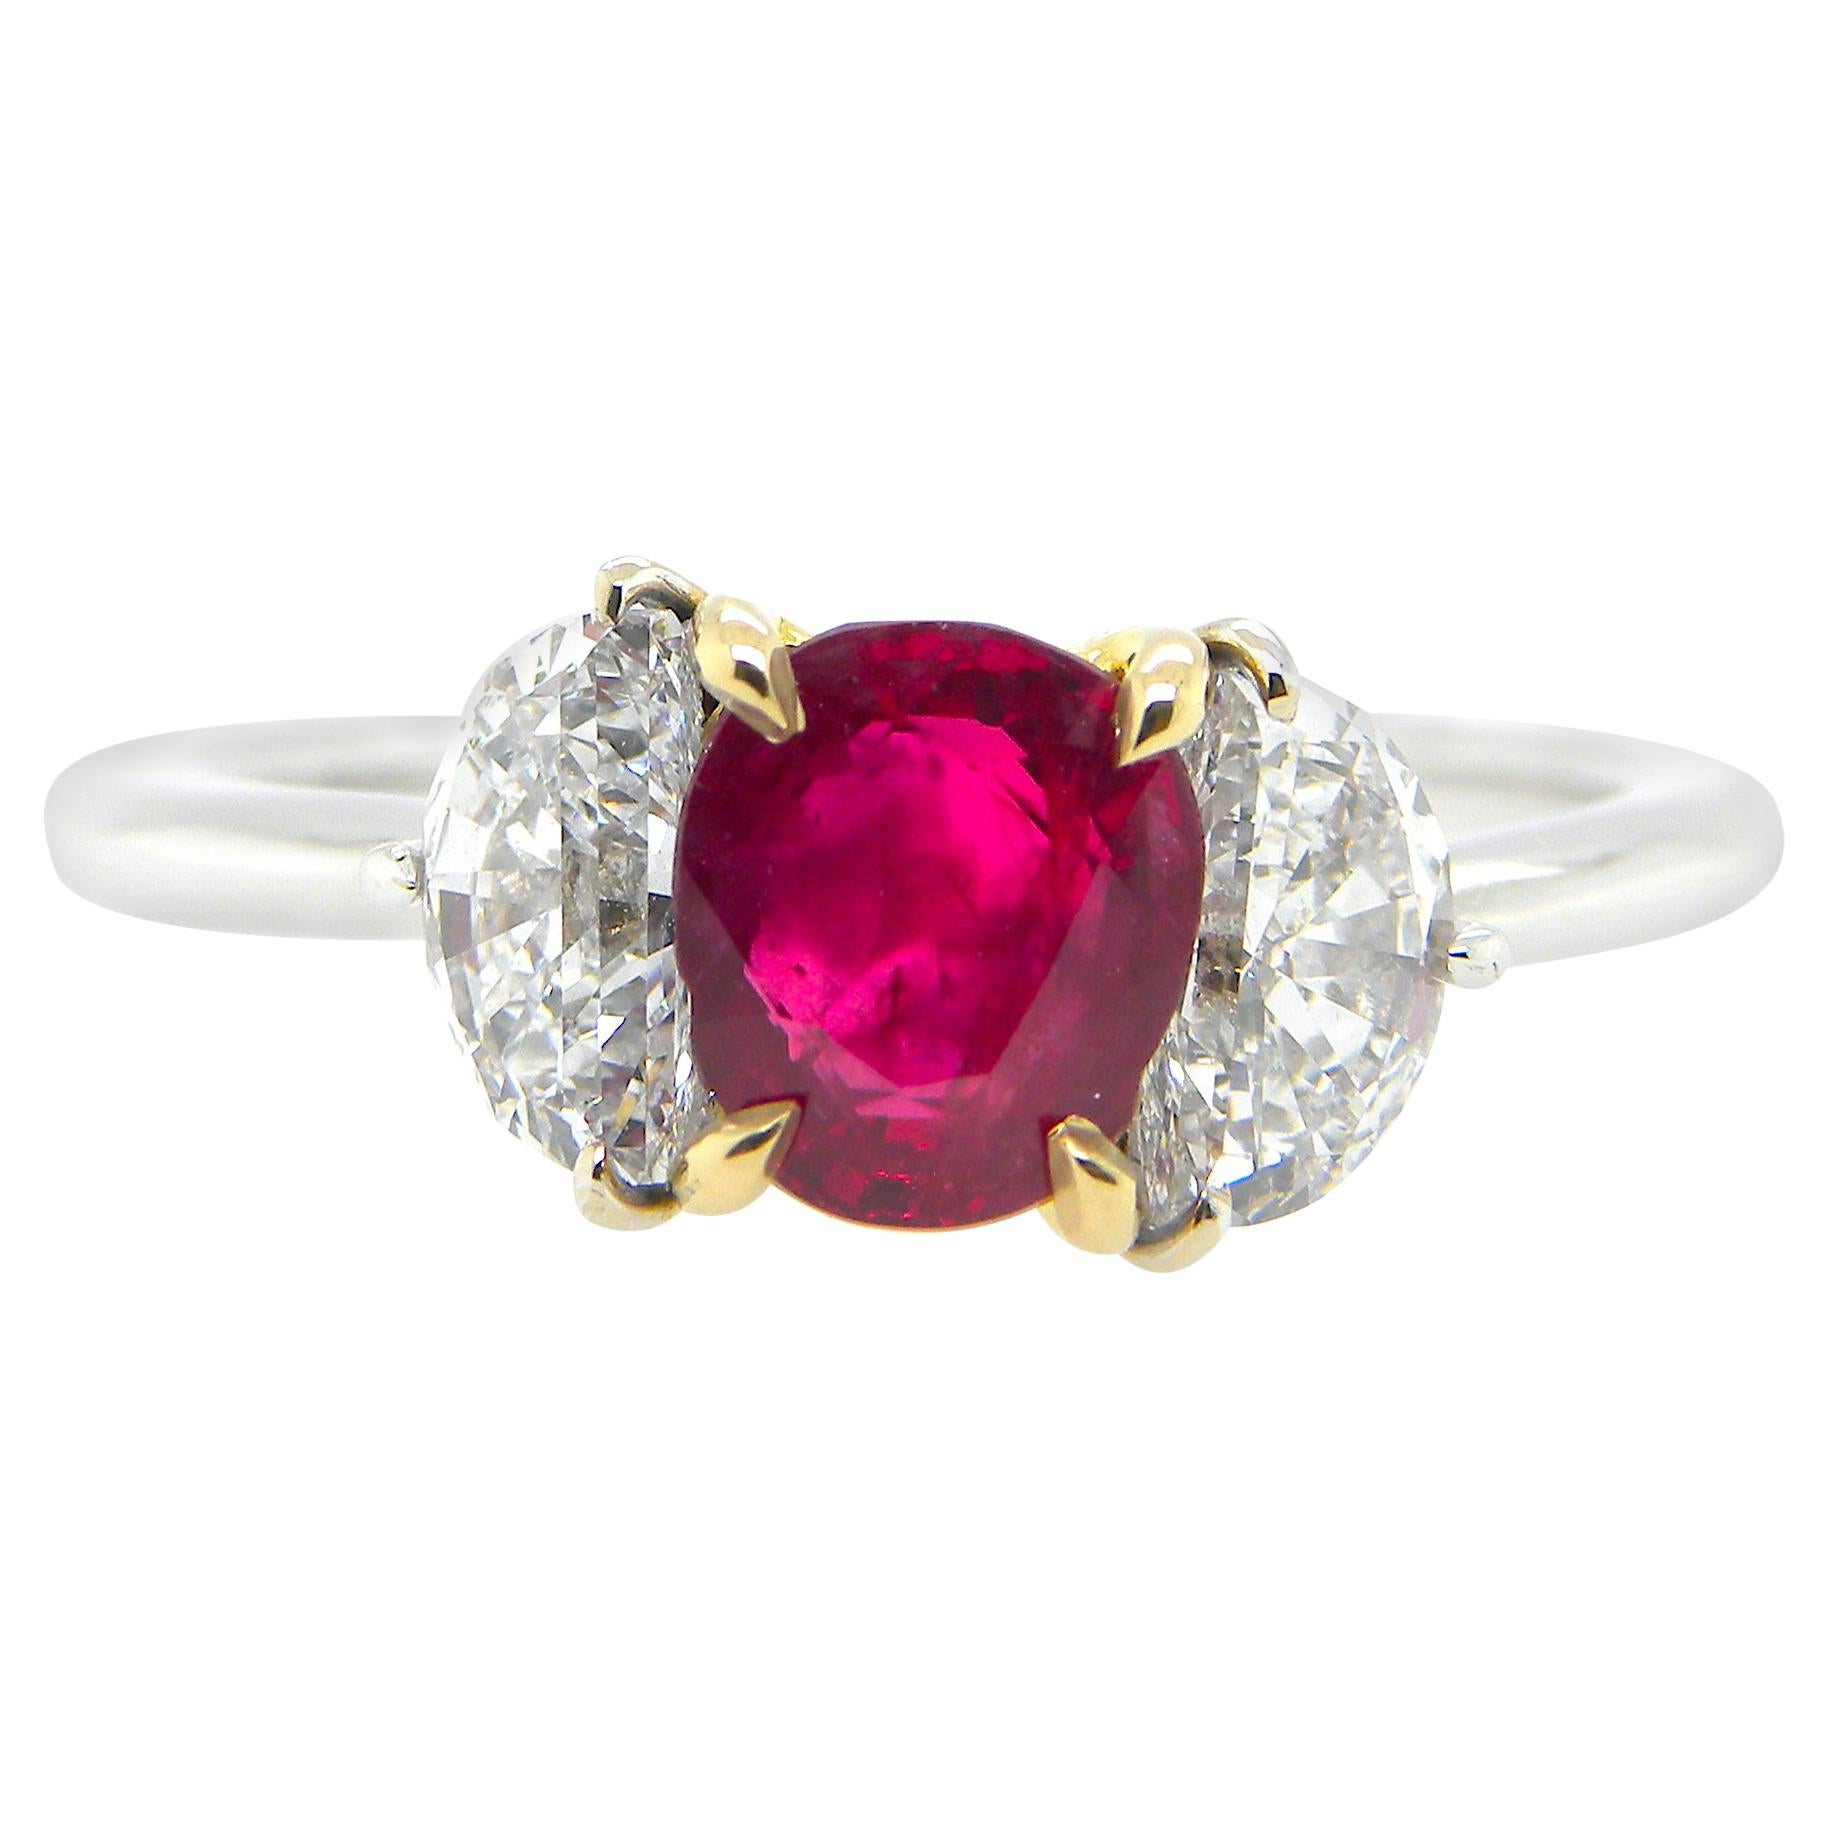 1.08 Carat GIA Certified Burma No Heat Pigeon's Blood Red Ruby and Diamond Ring